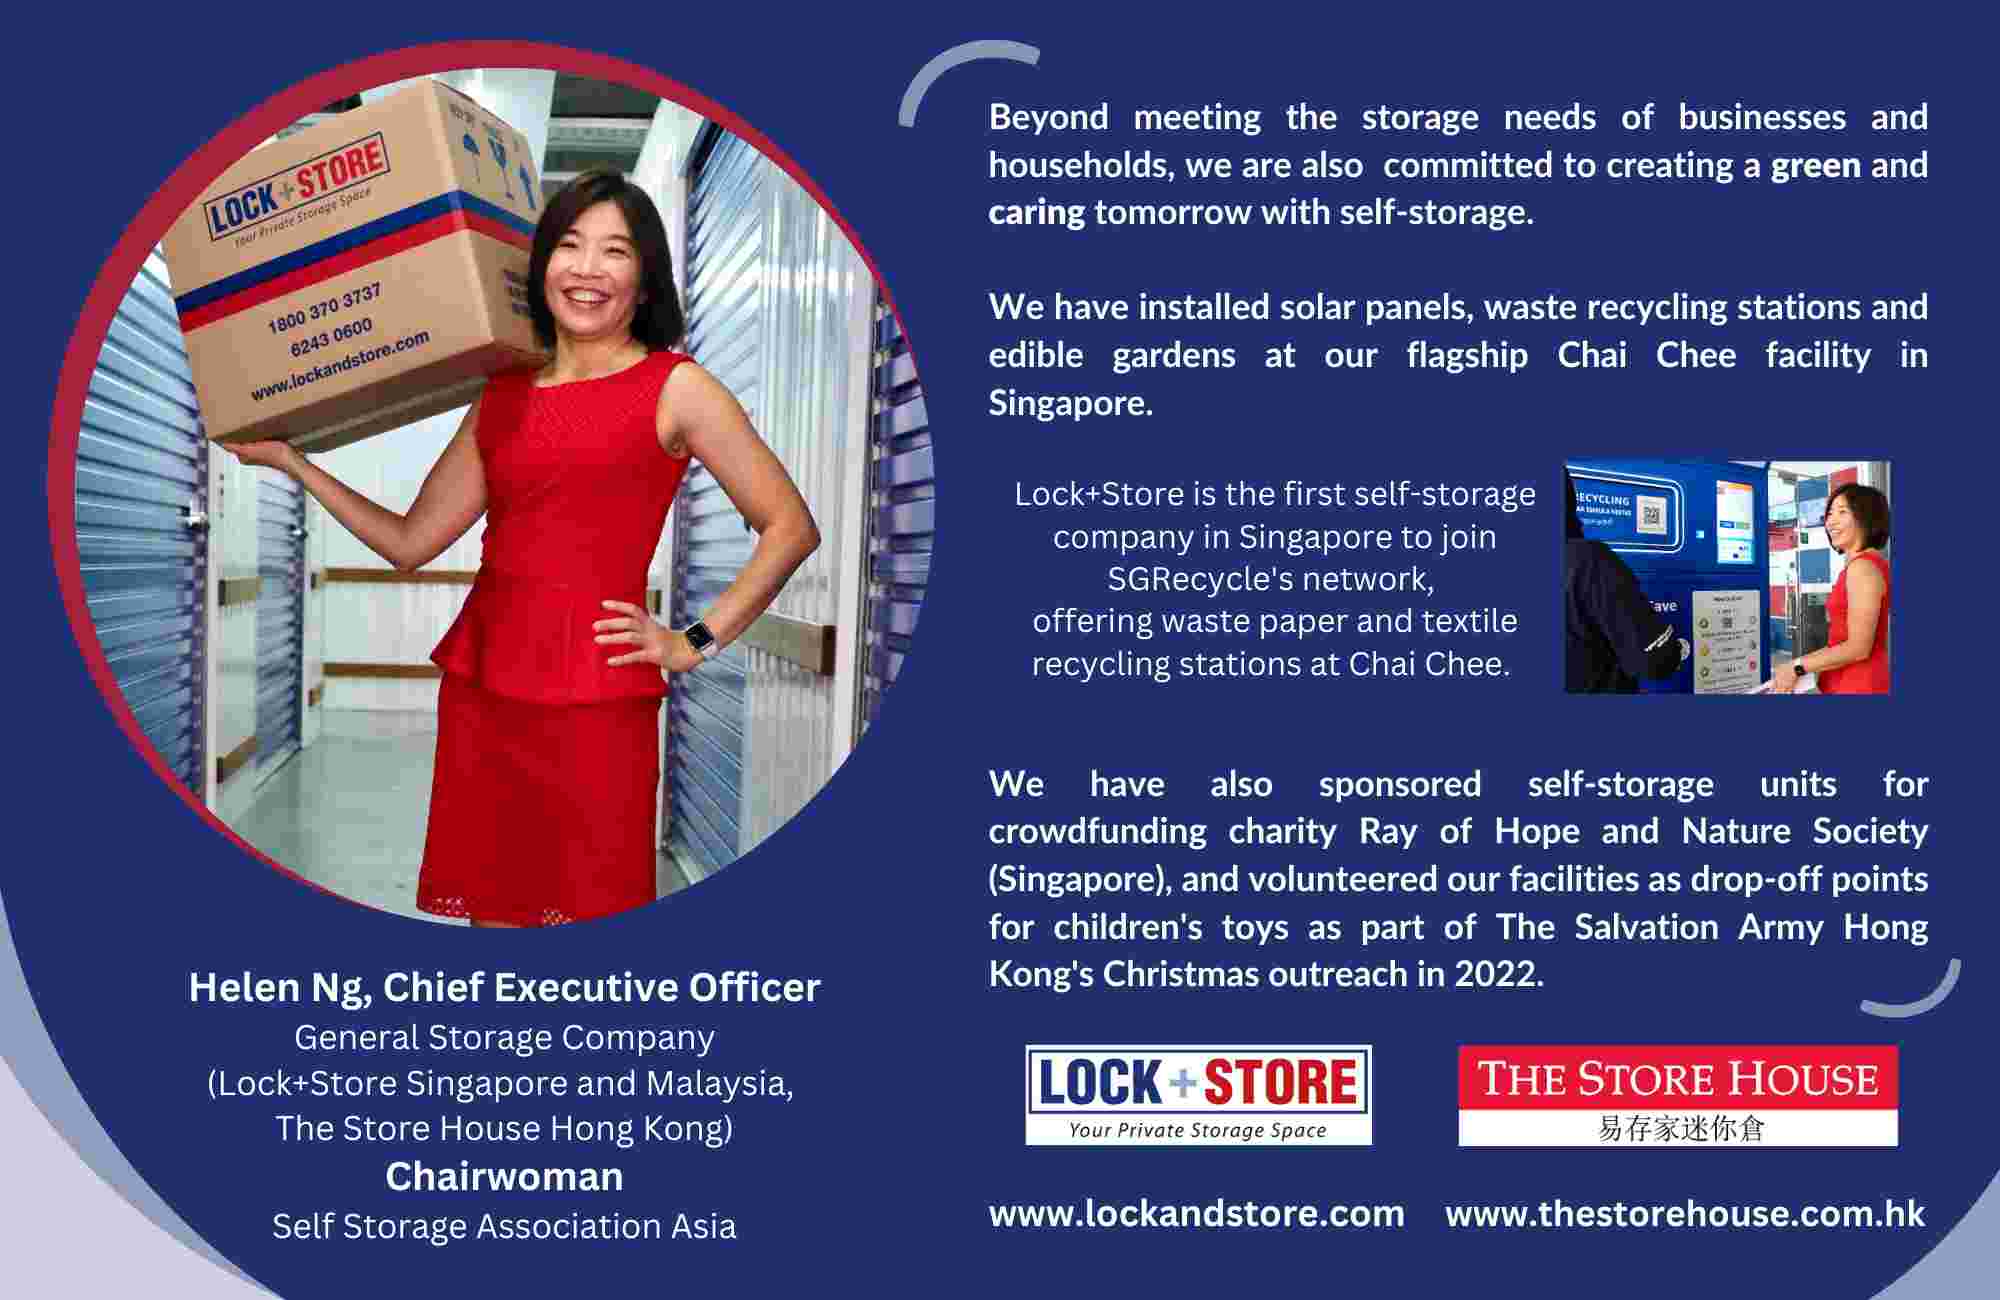 Helen Ng, CEO of storage space provider General Storage Company